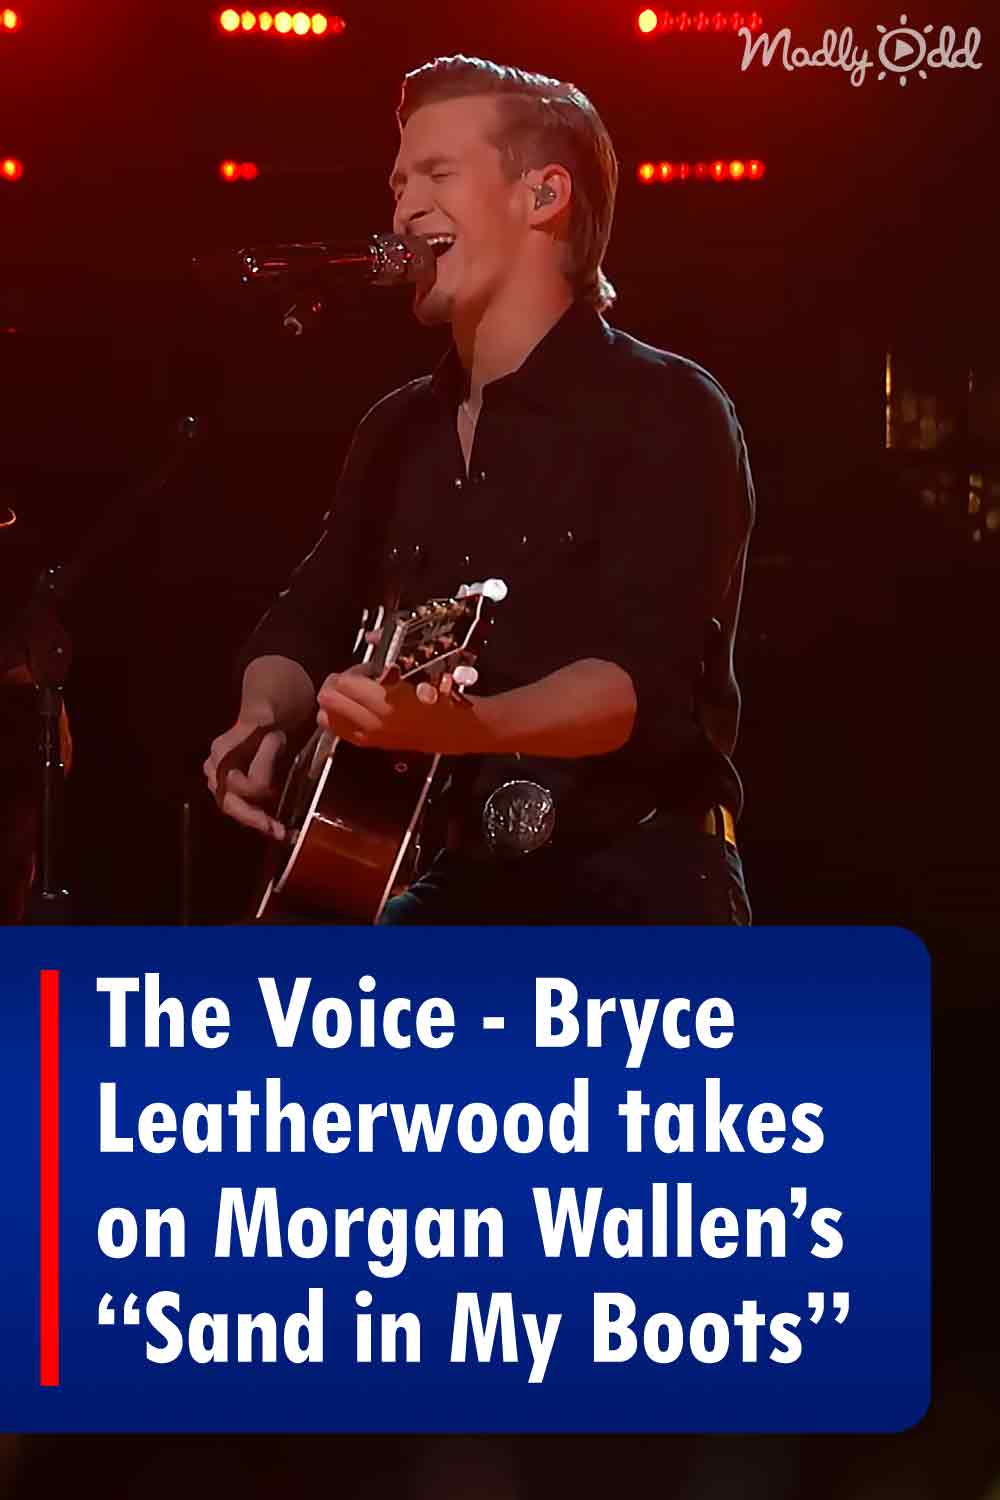 The Voice - Bryce Leatherwood takes on Morgan Wallen’s “Sand in My Boots”